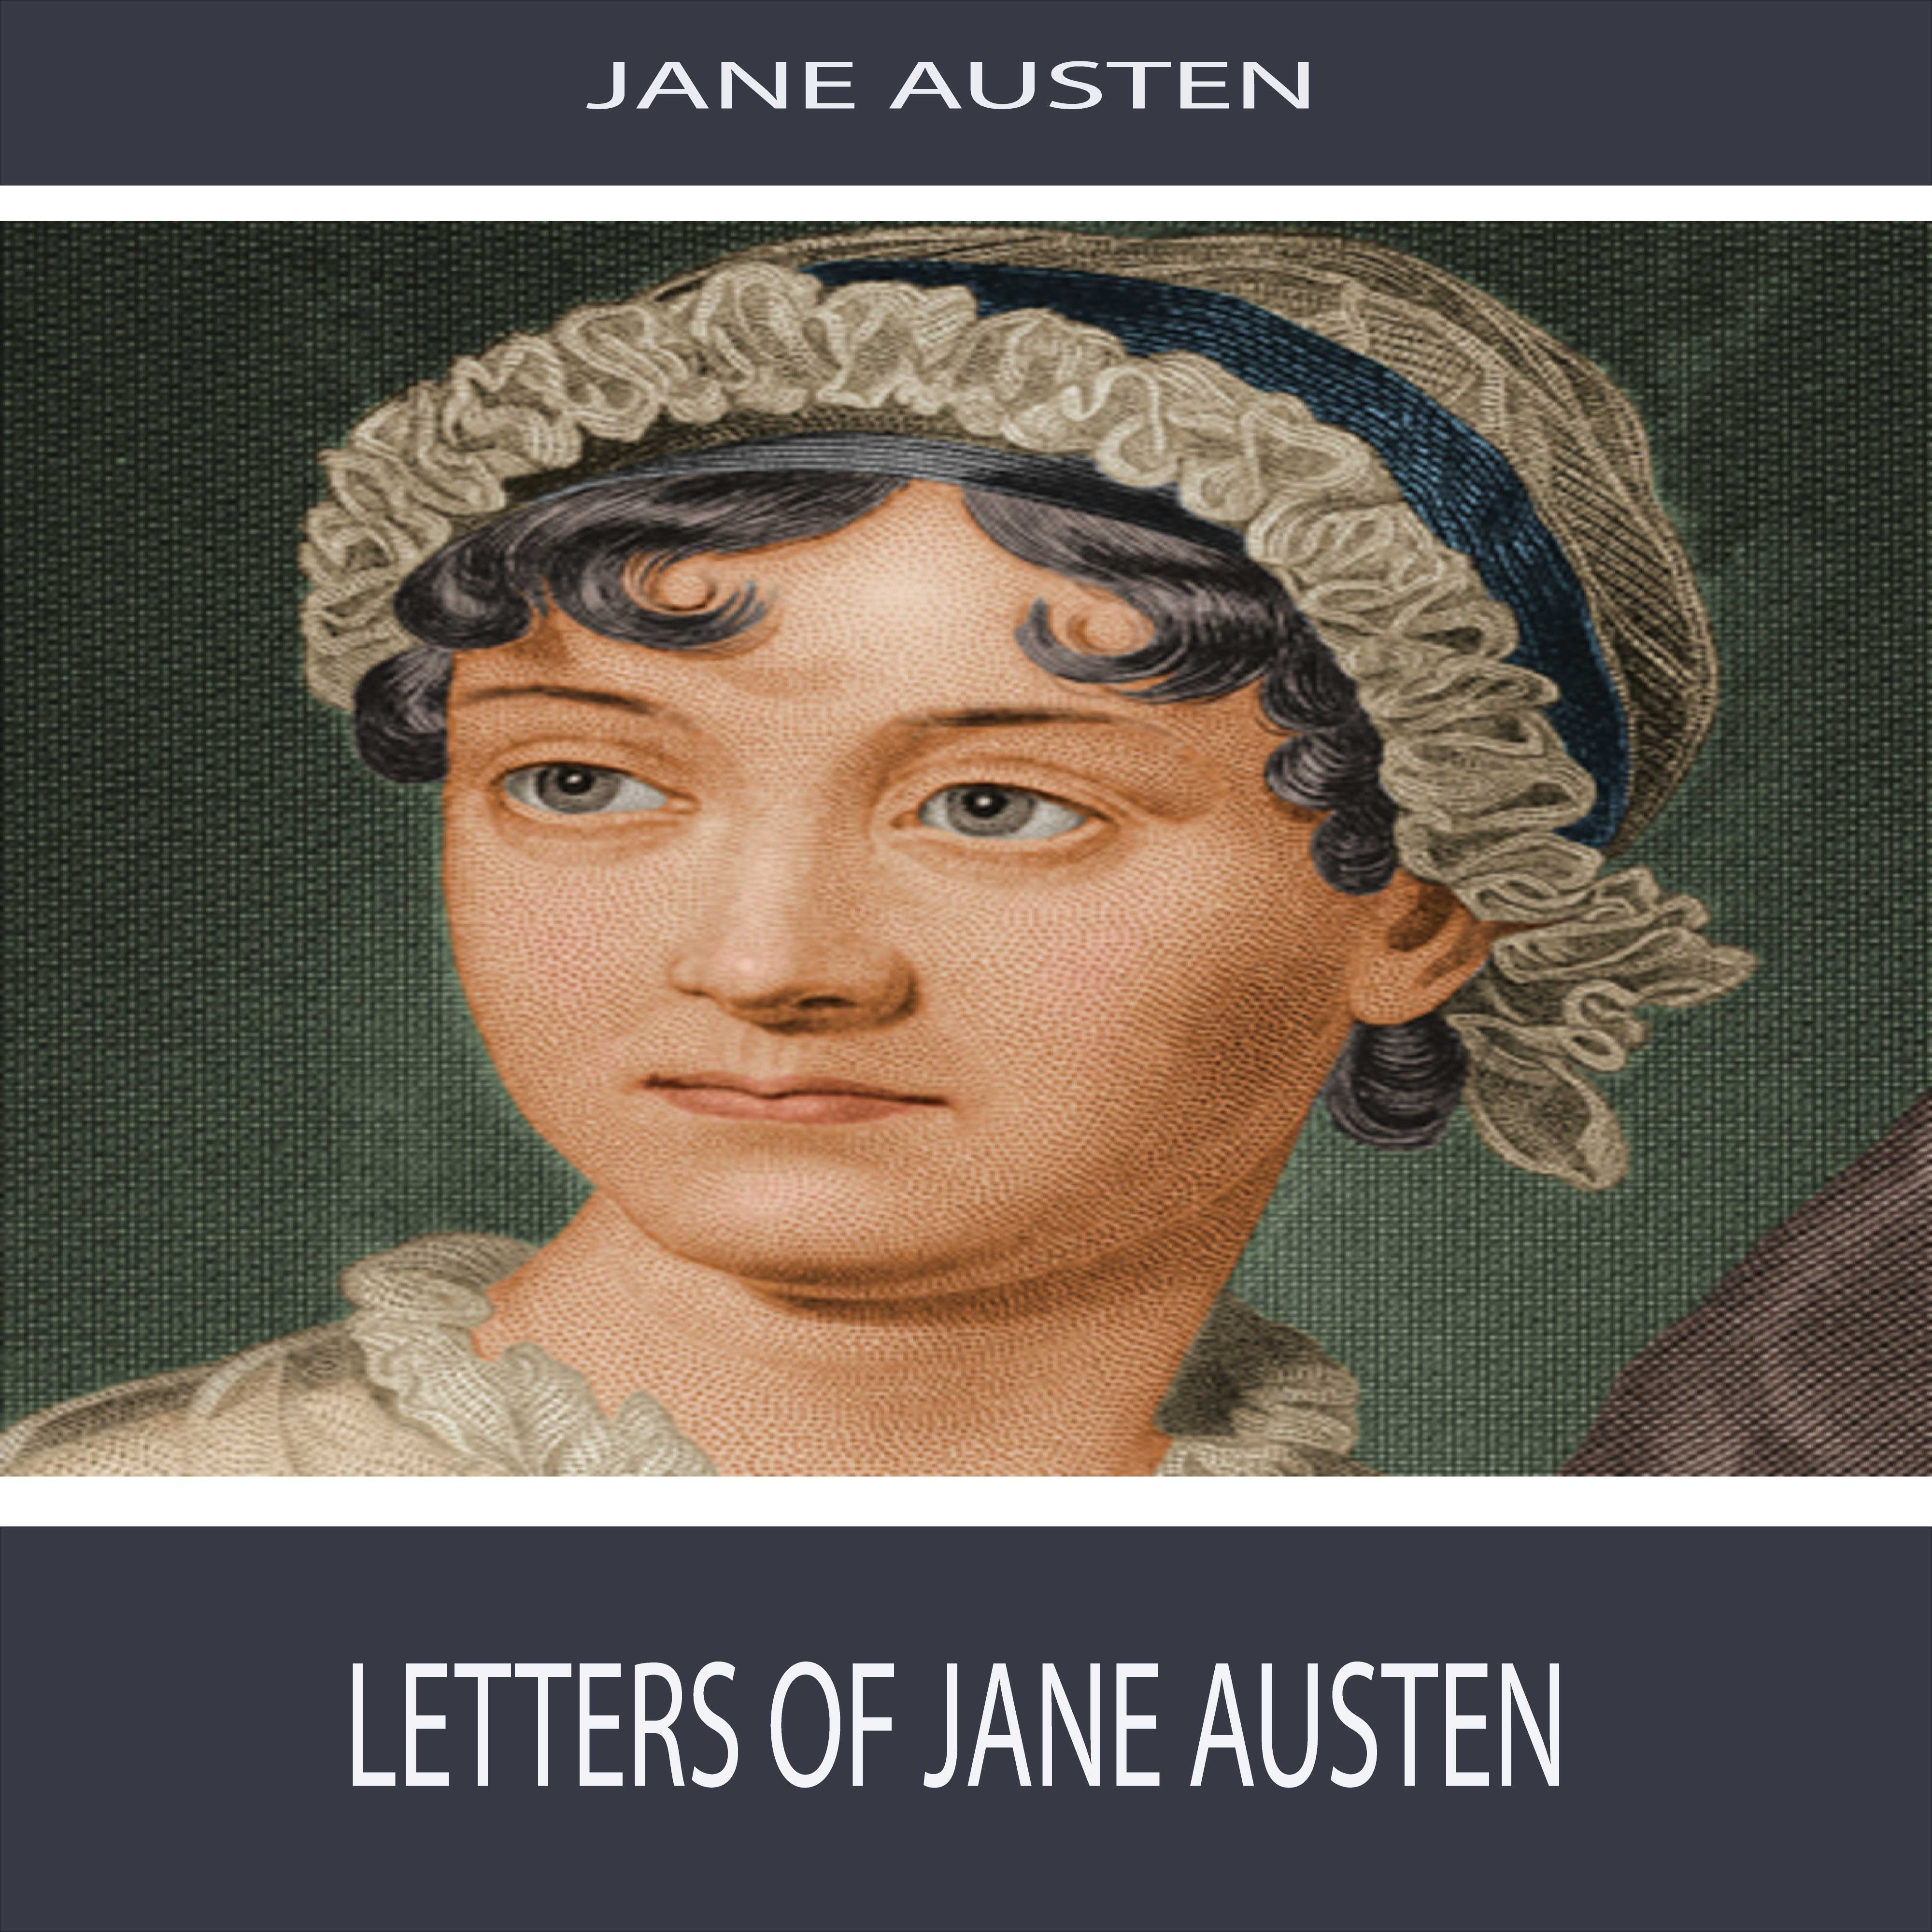 Letters of Jane Austen: Section 11